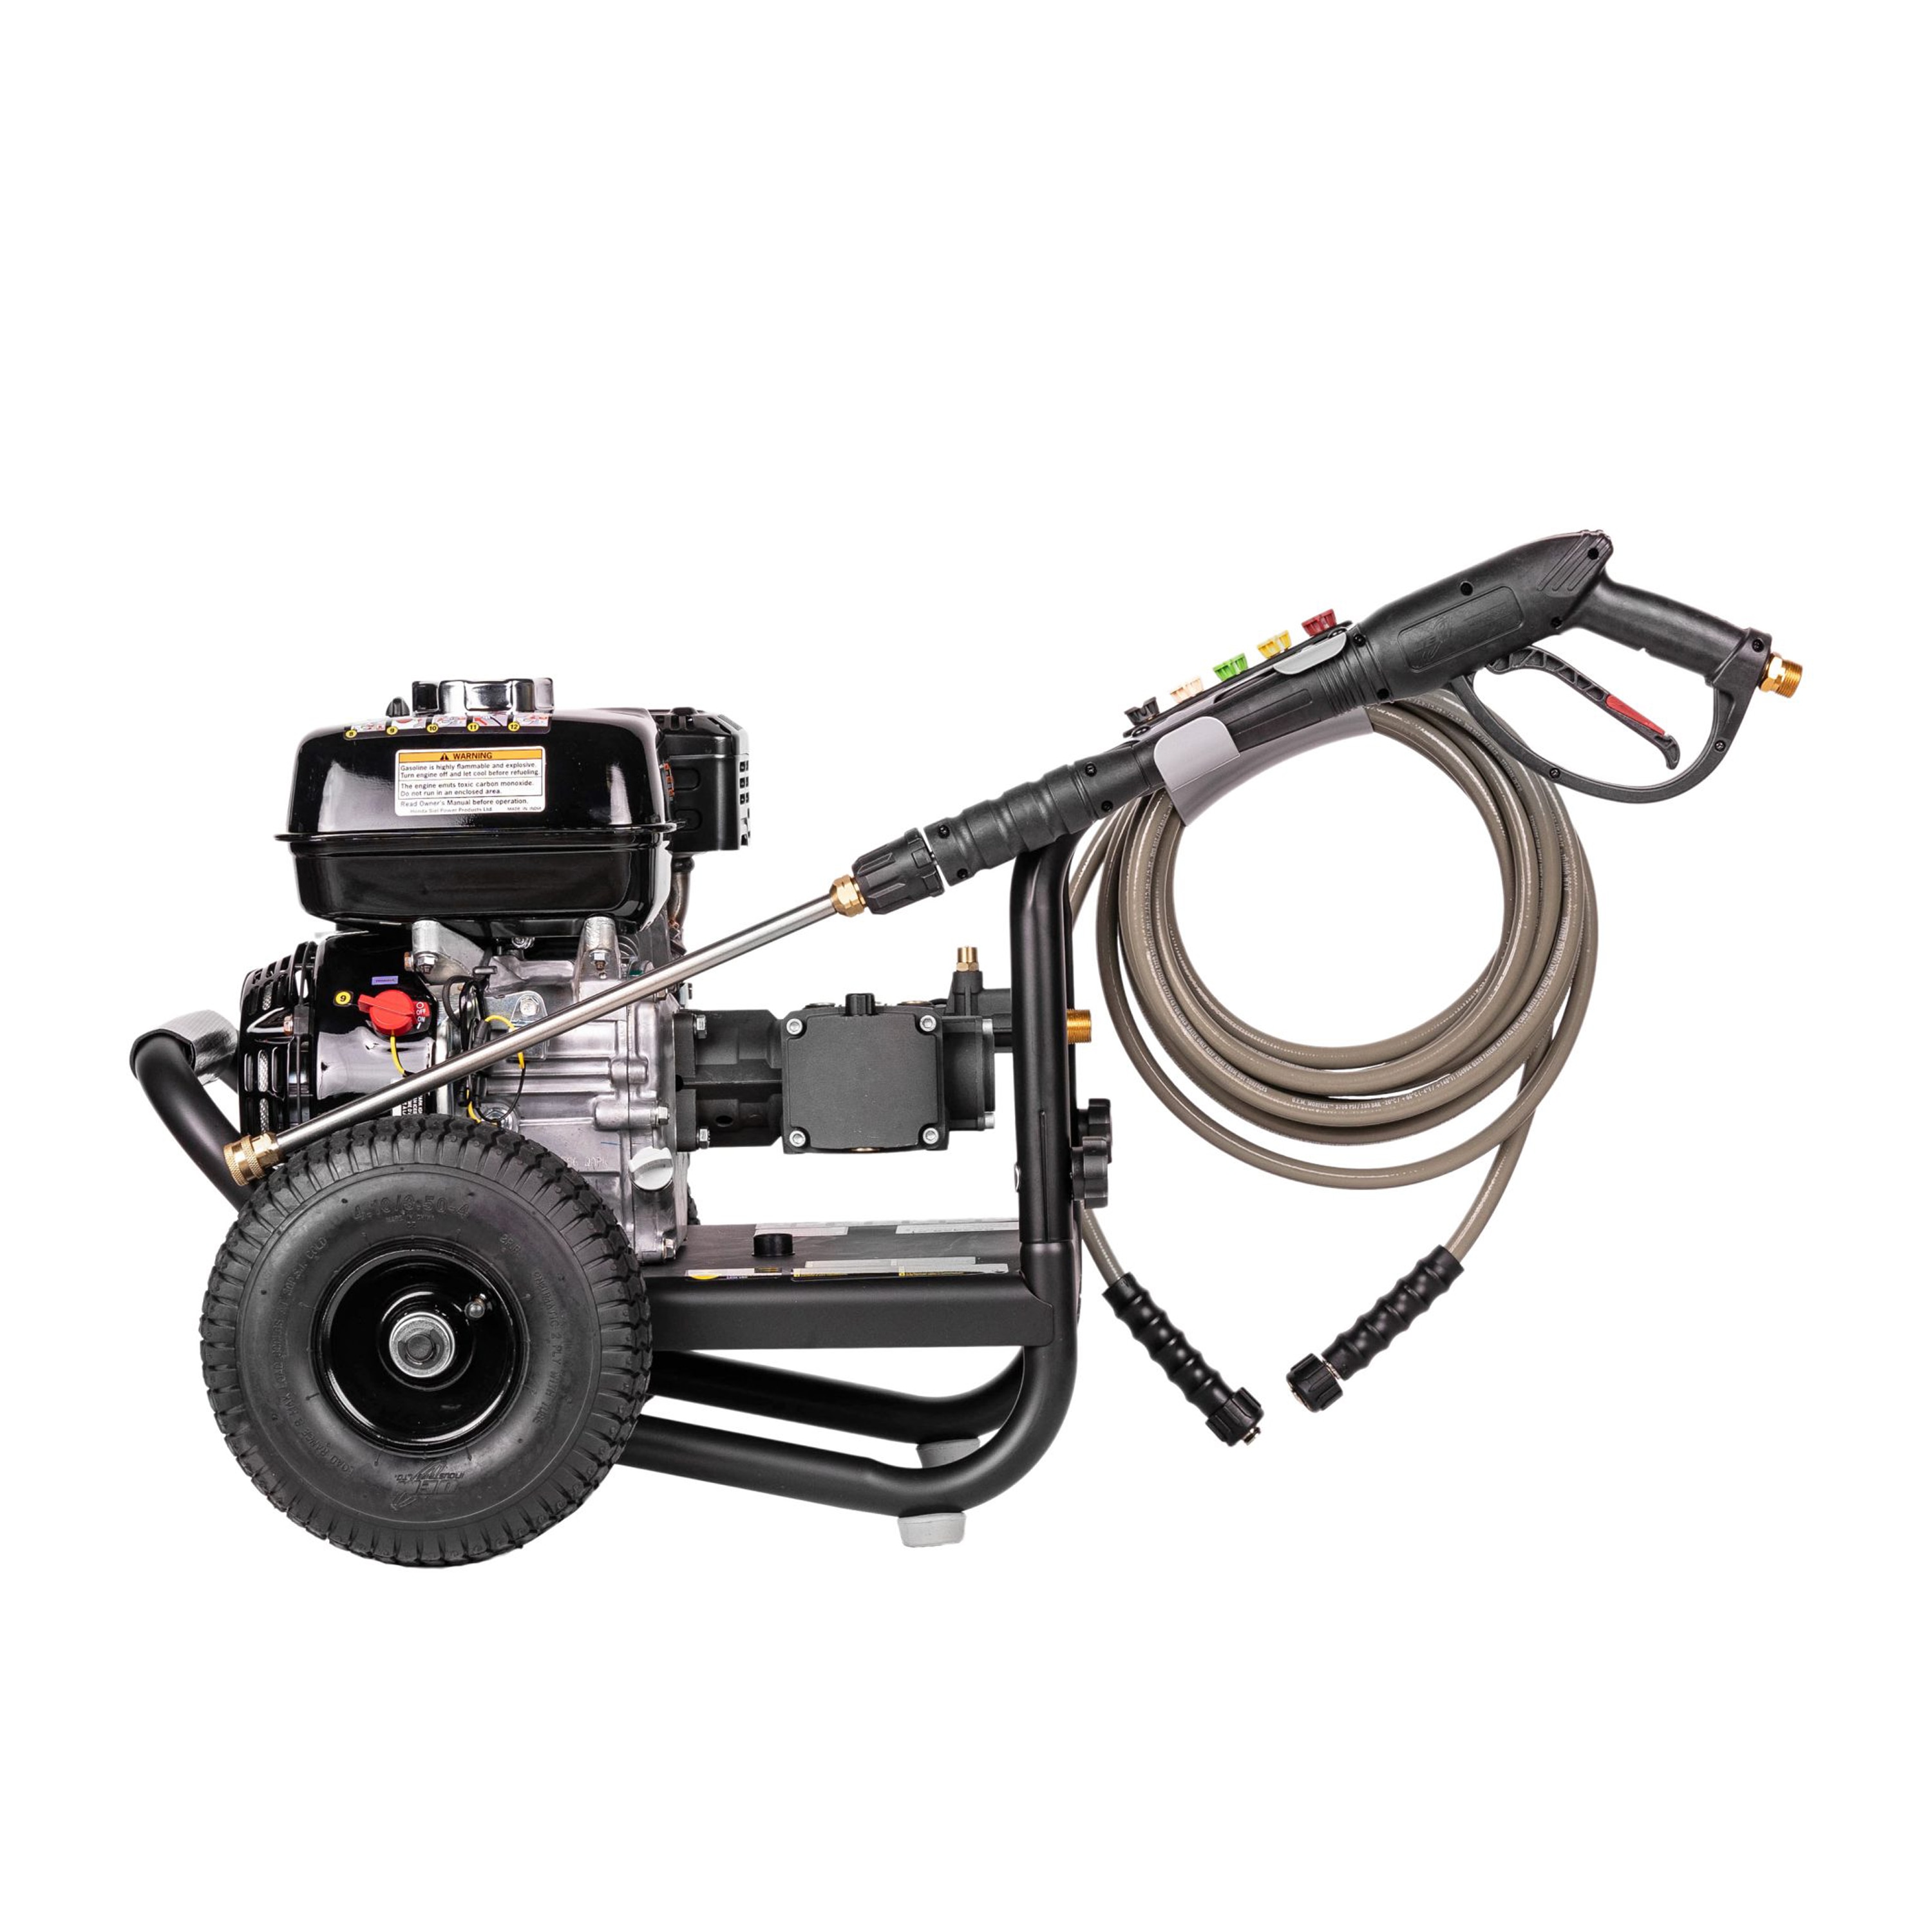 SIMPSON 49-State PowerShot 3300 PSI 2.5-Gallons Cold Water Gas 